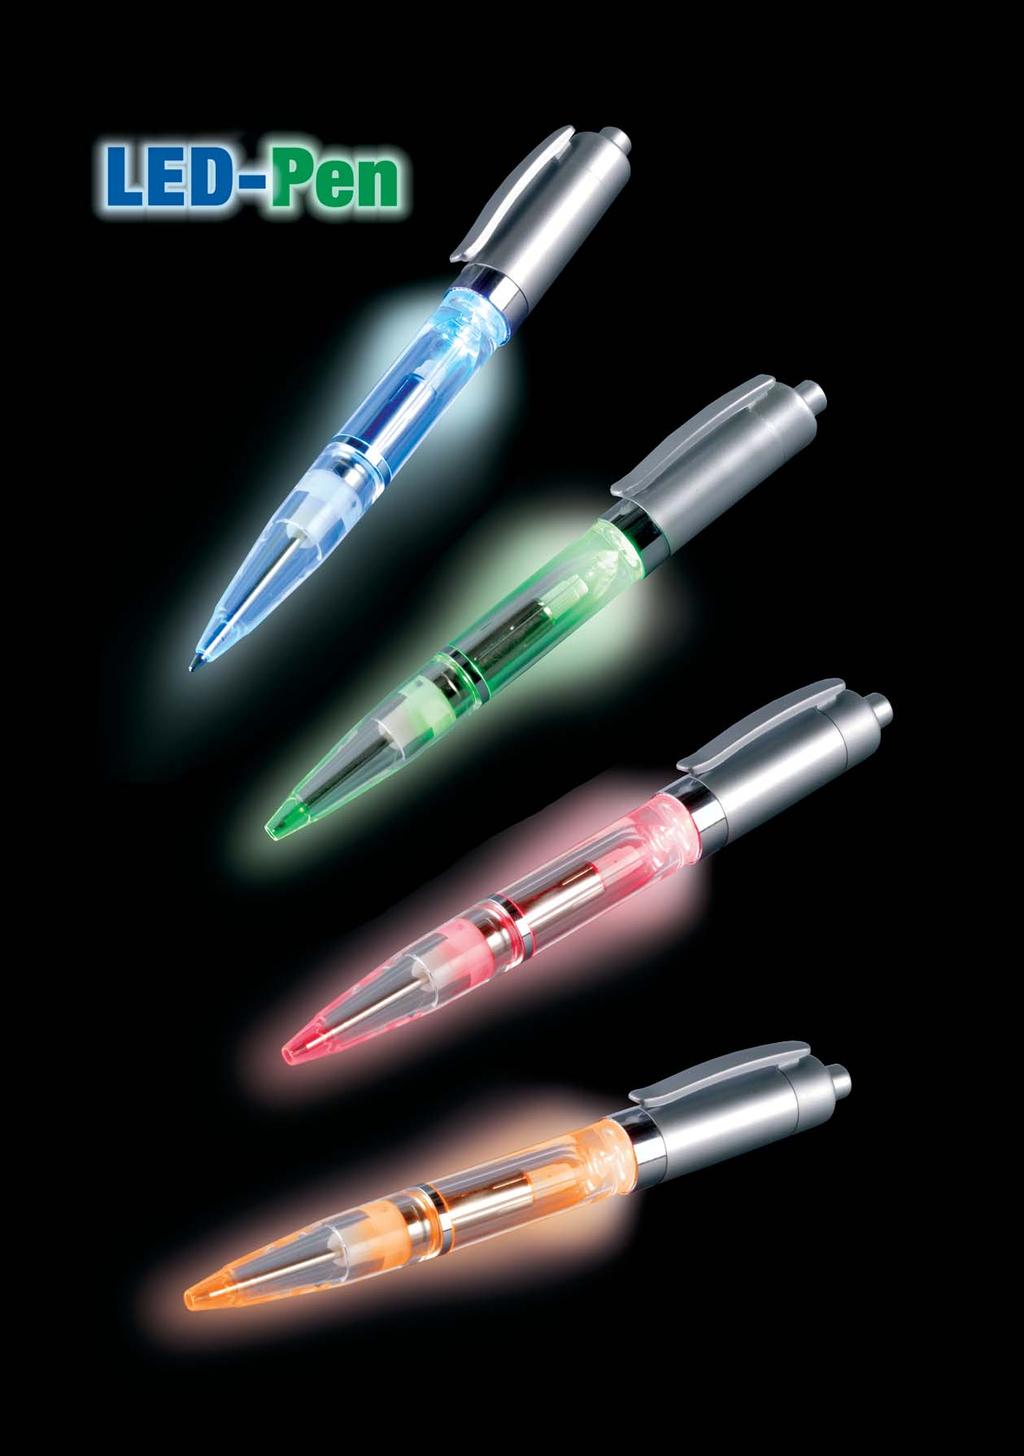 LED-Pen: twist ball pen with light-efect in blue, green or red, blue ink.